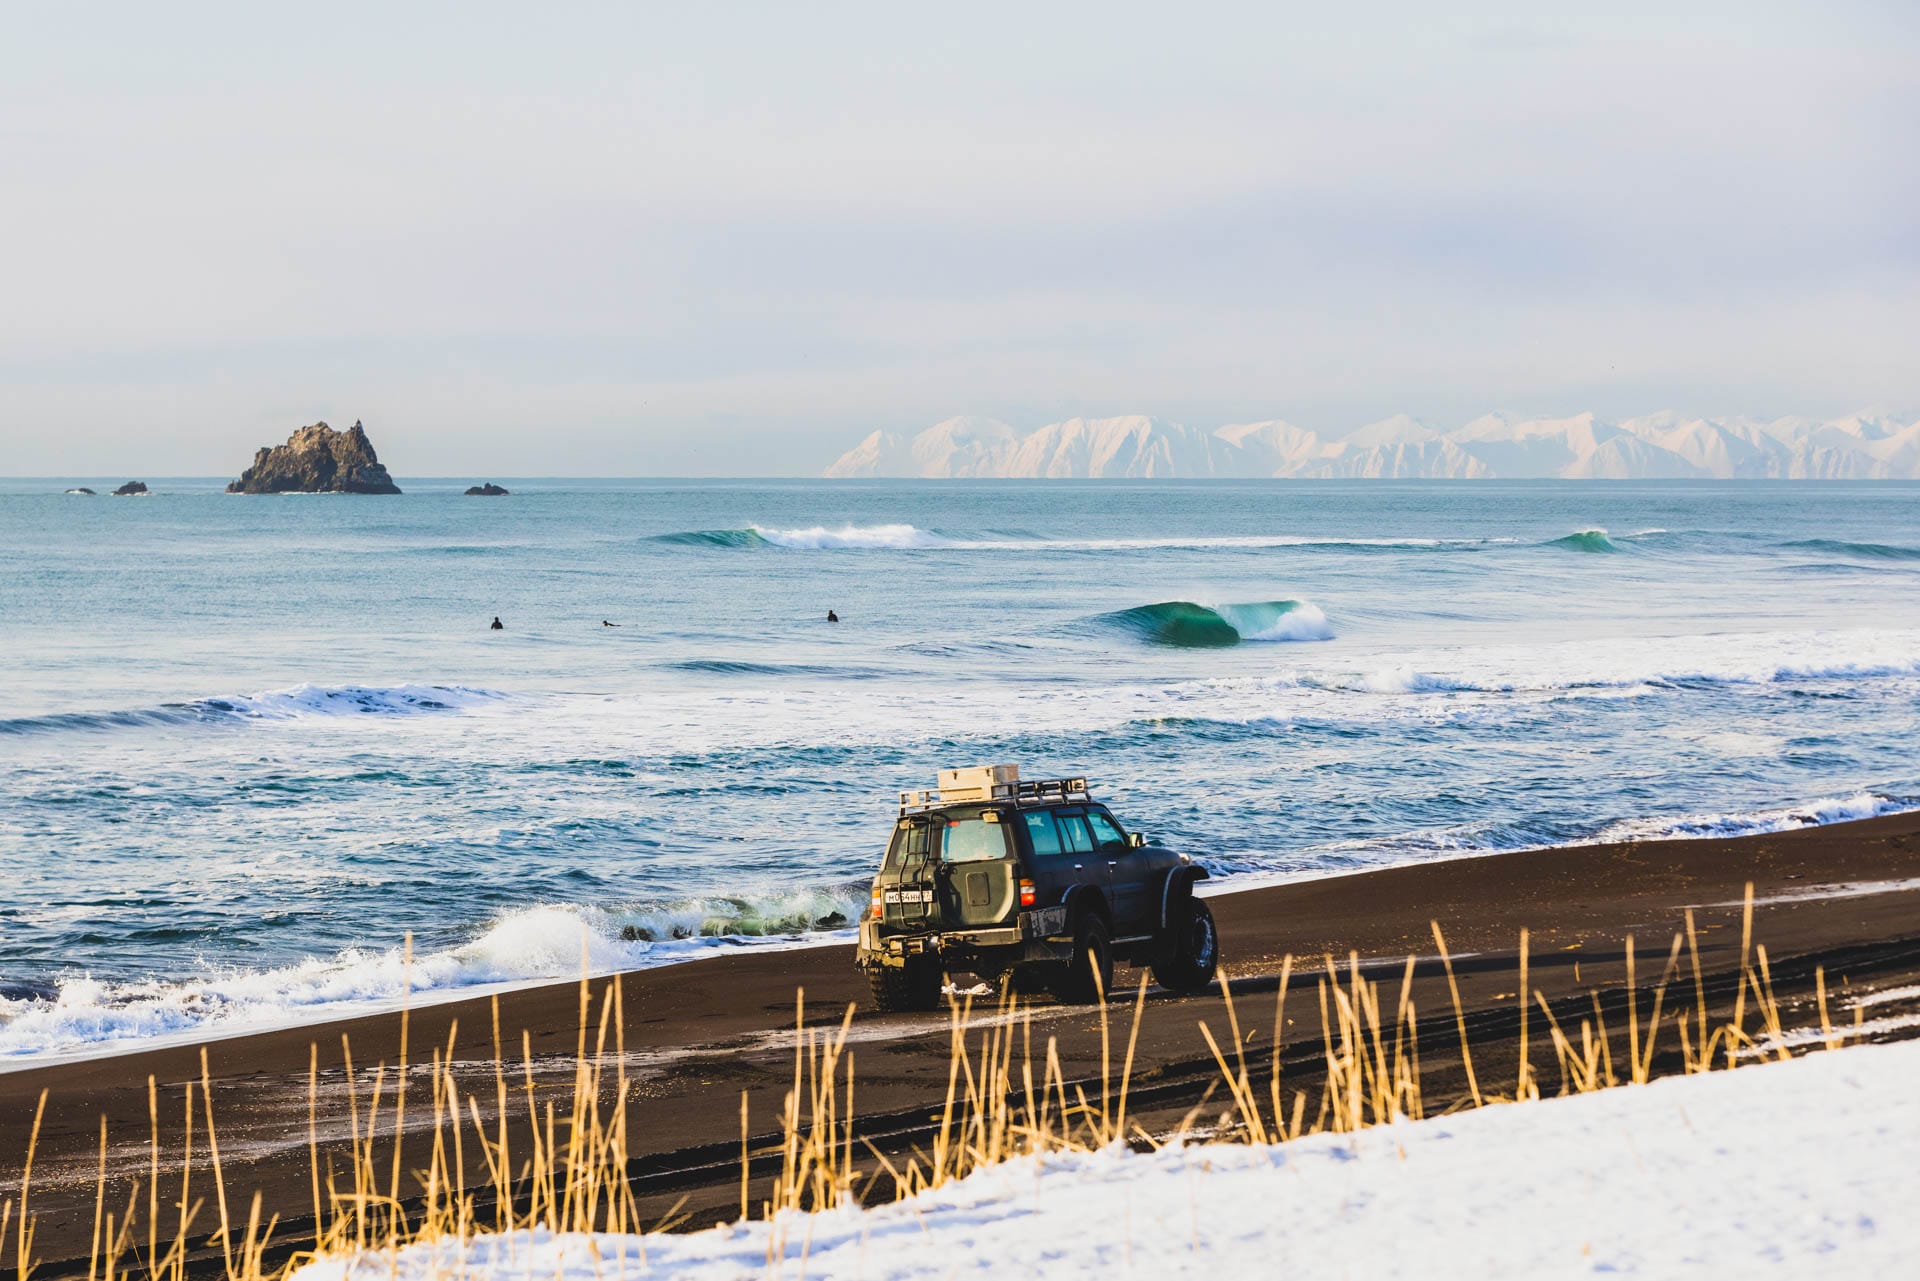 Meet the Aussie Surfers Who Travelled to Russia's Kamchatka Peninsula in Search of Unridden Waves, Tim Ashelford